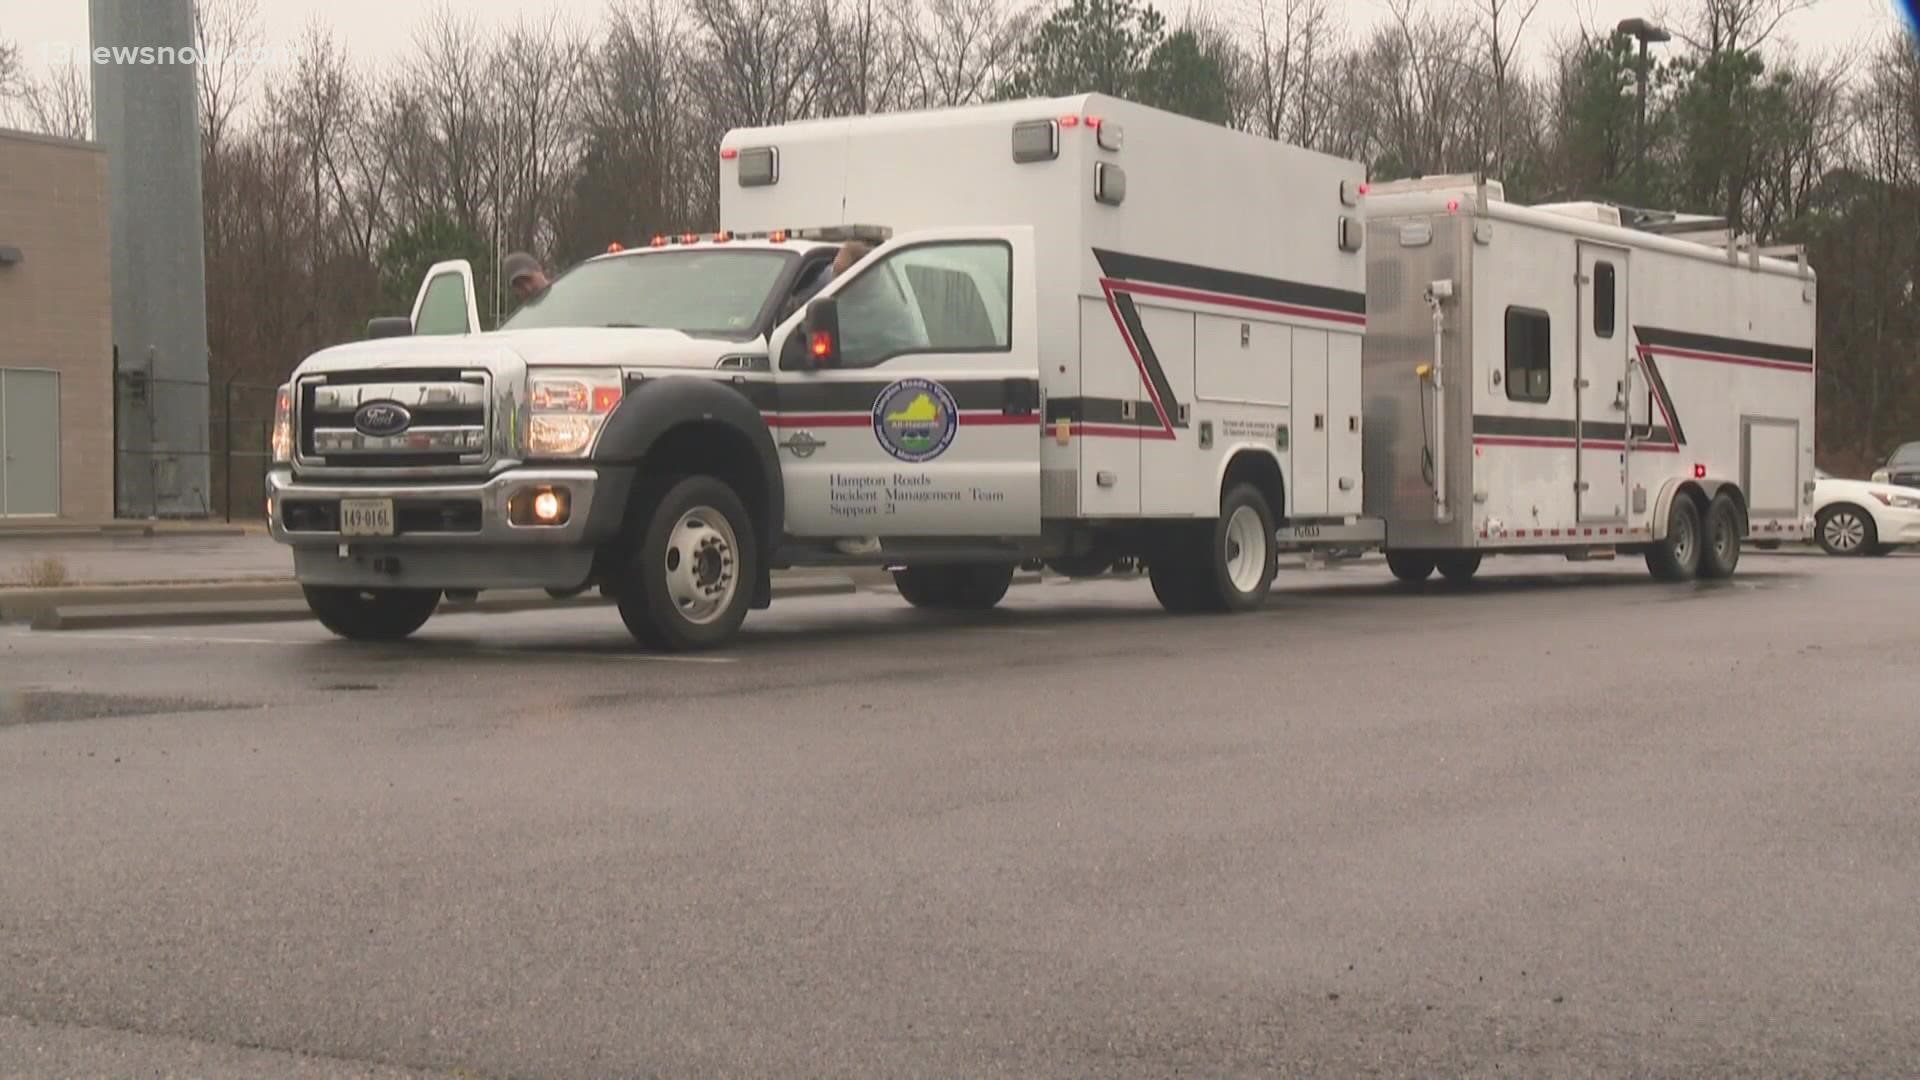 Members of the Hampton Roads Incident Management Team are heading to Kentucky to help with the aftermath of the deadly tornadoes that struck the state.